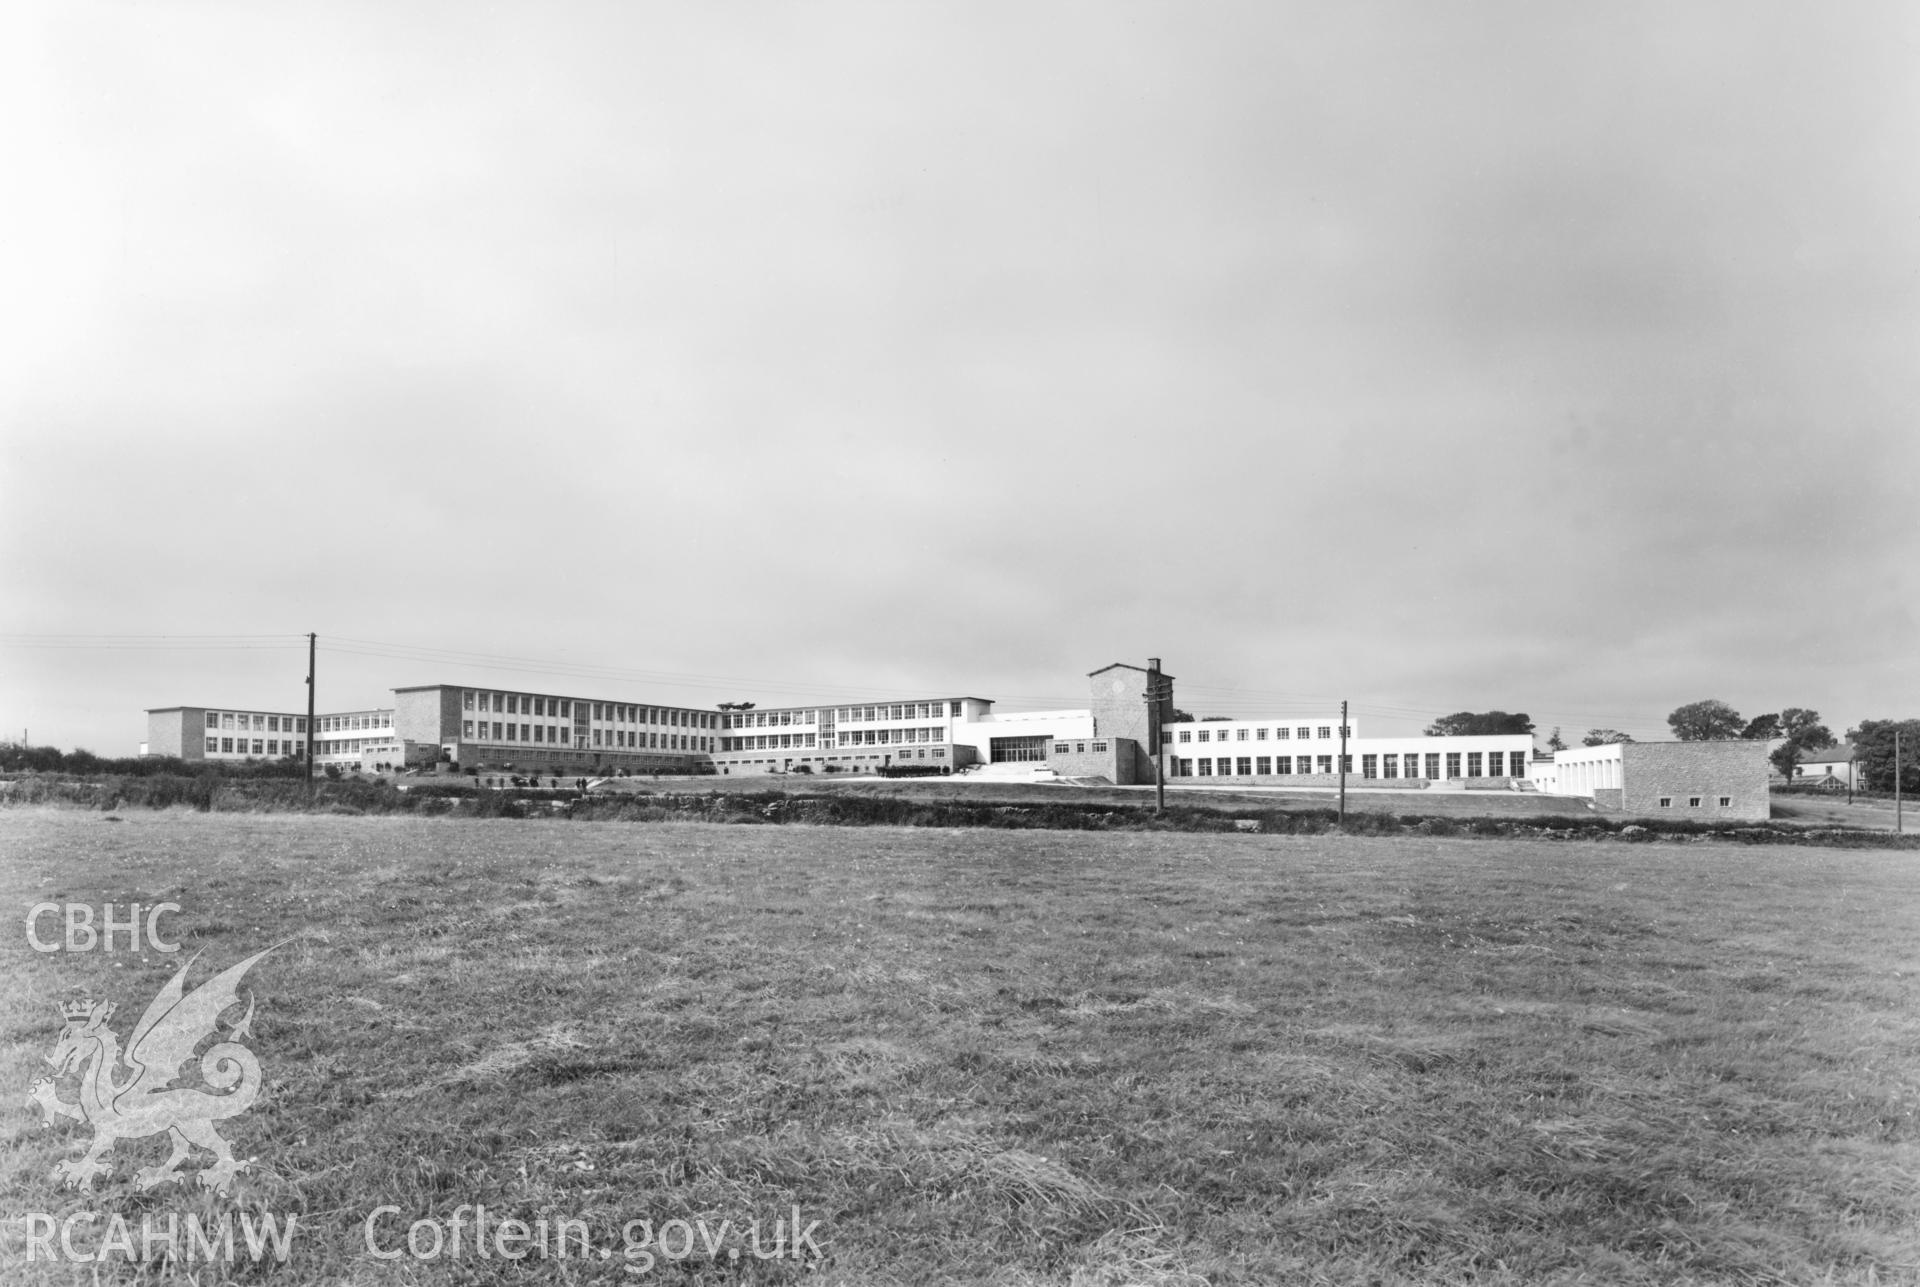 1 b/w print showing exterior view of Ysgol Syr Thomas Jones, Amlwch; collated by the former Central Office of Information.